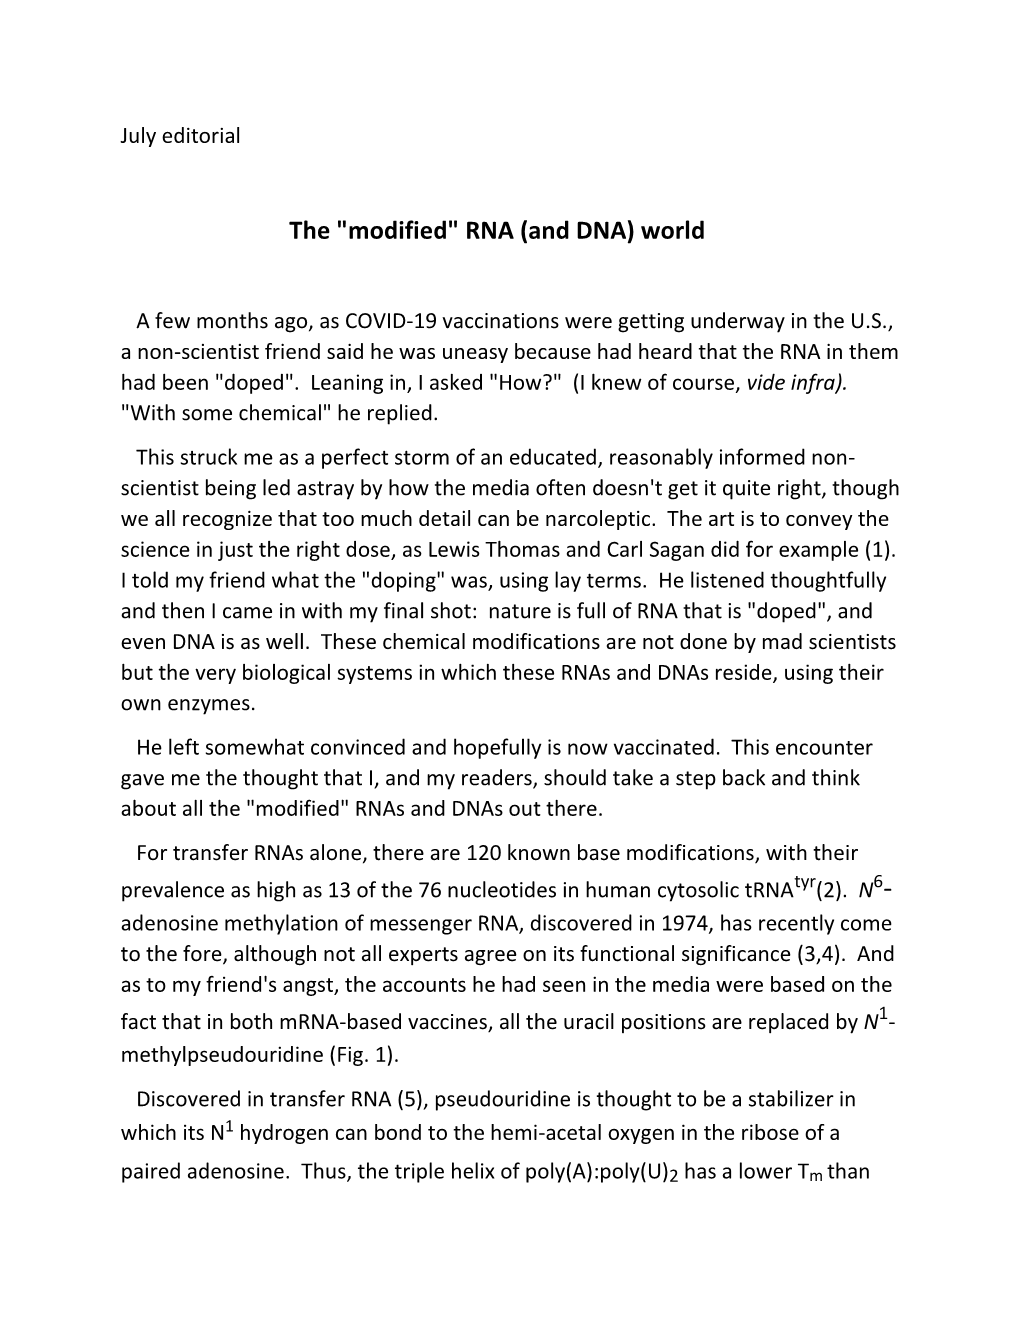 "Modified" RNA (And DNA) World